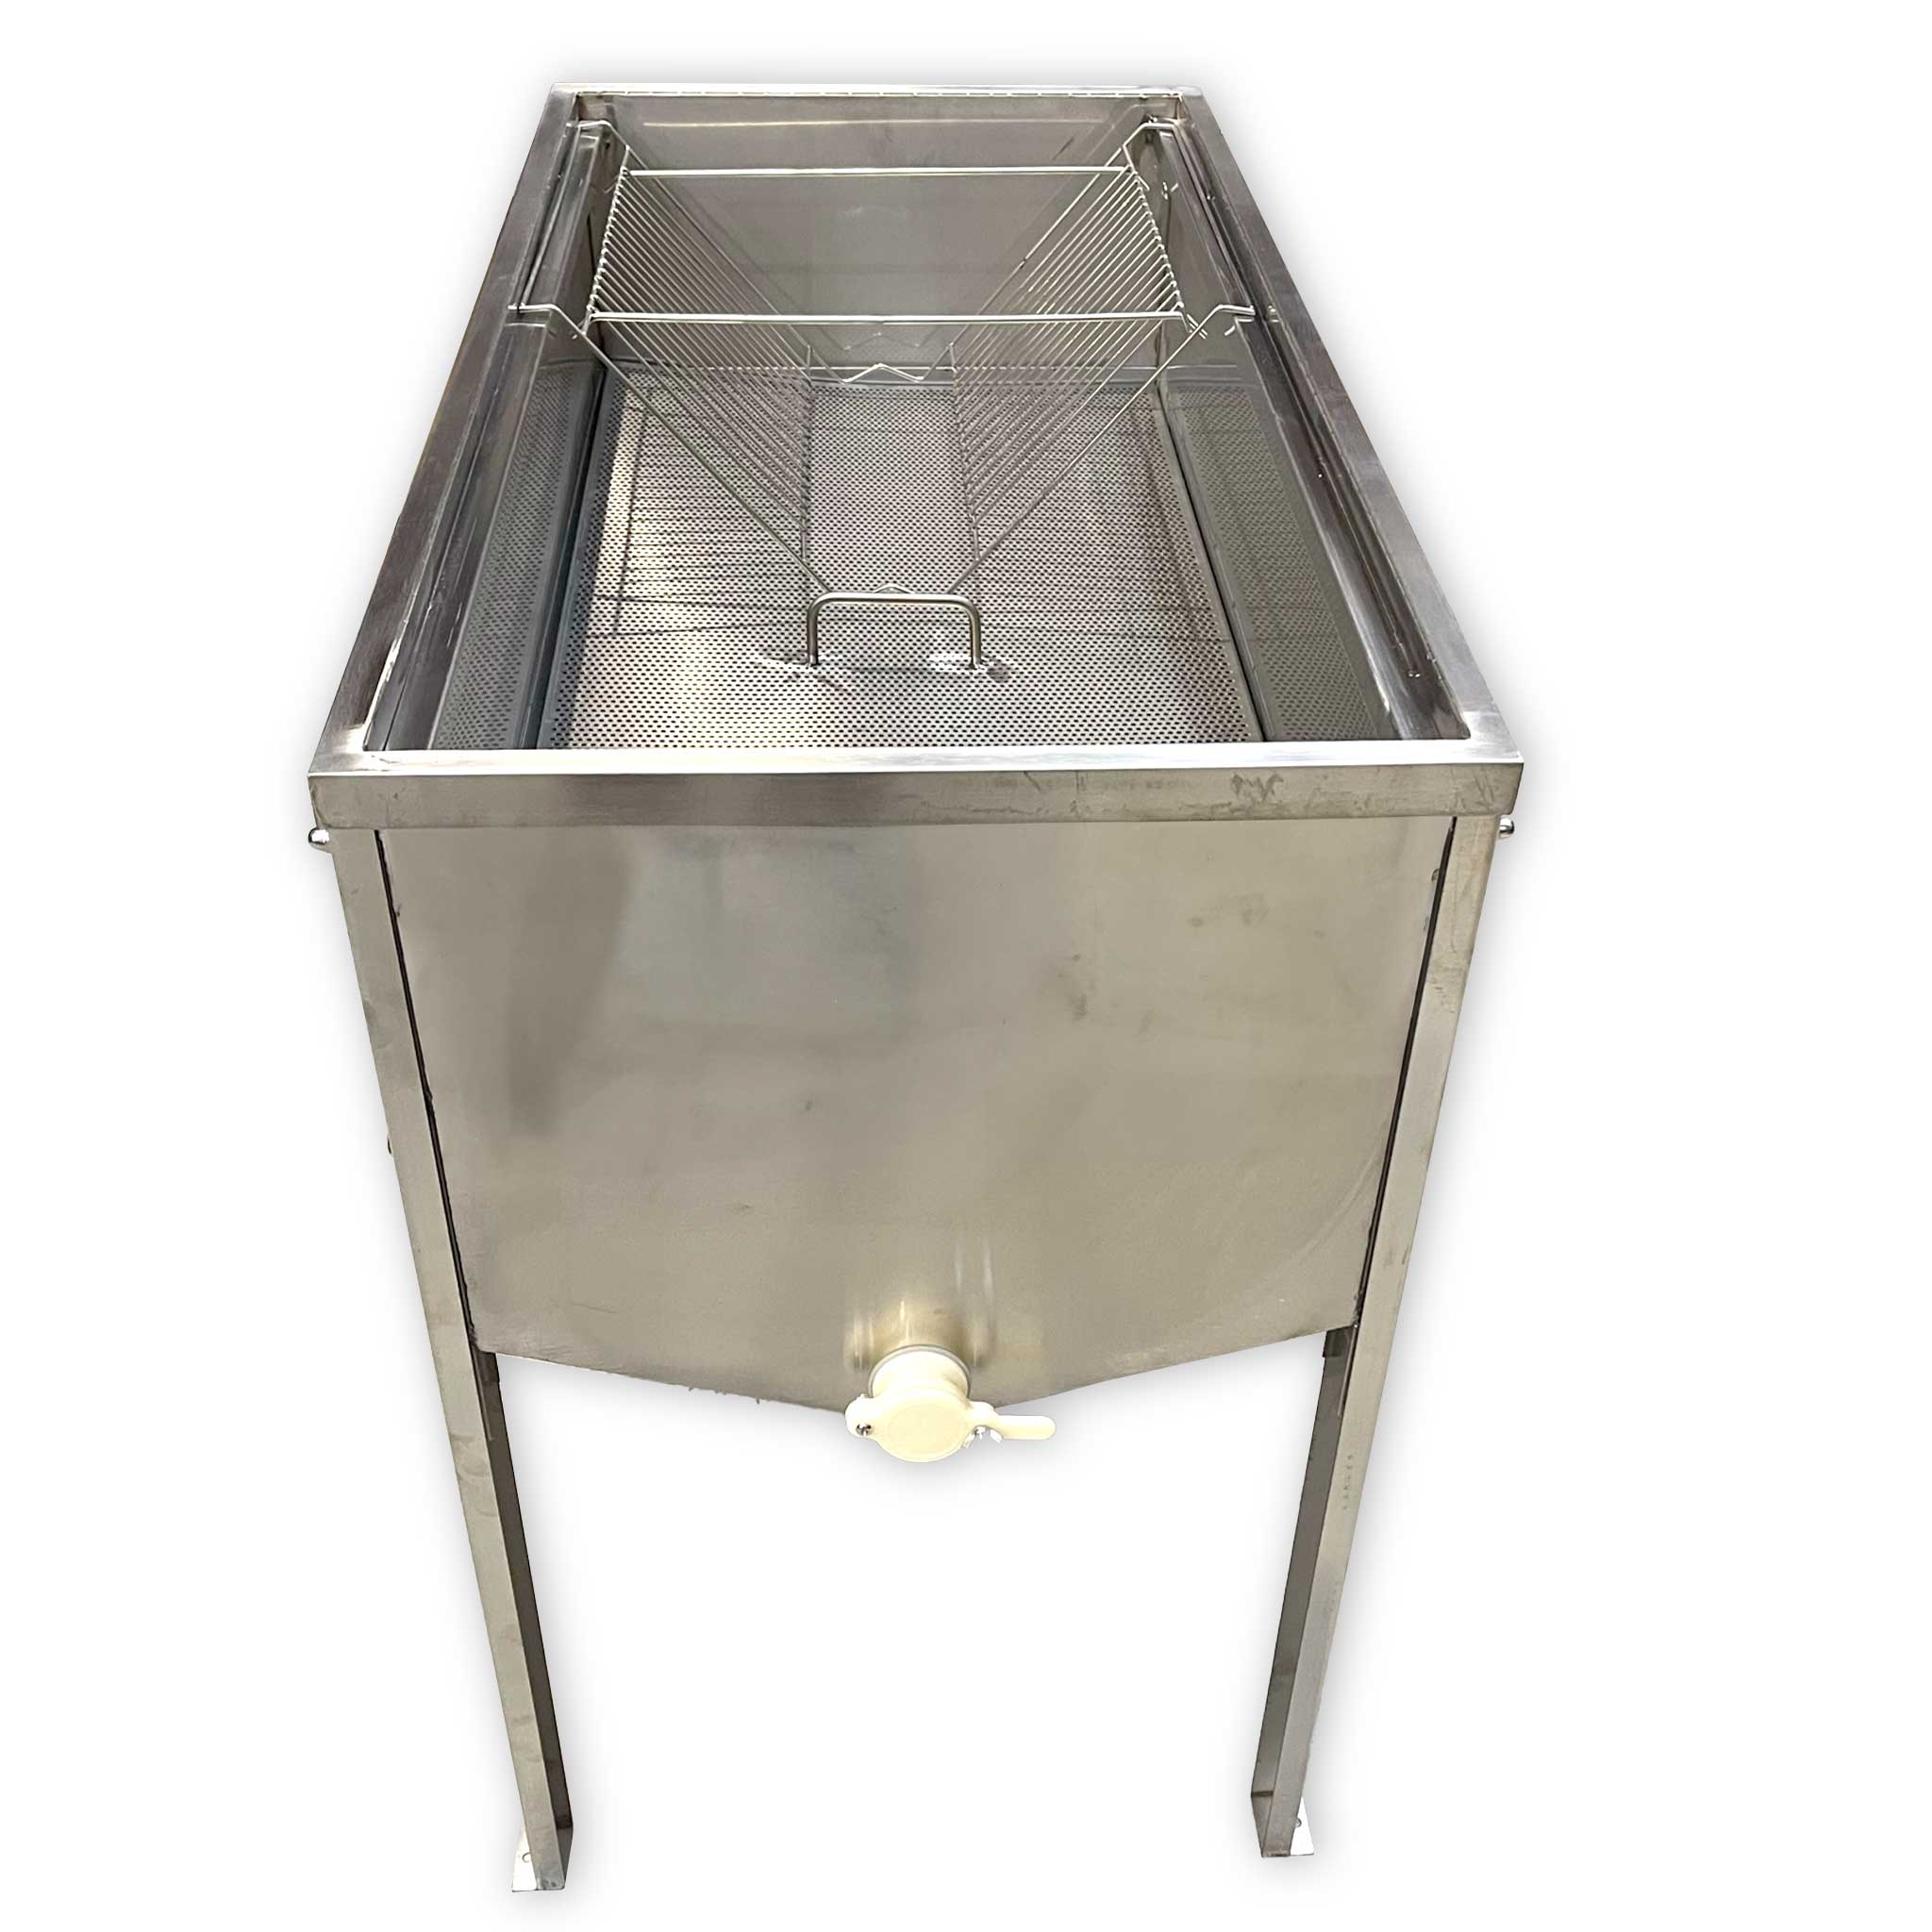 Honey Uncapping Table with Stainless-steel Uncapping Tray and Strainer -  collection by Buzzbee Beekeeping Supplies